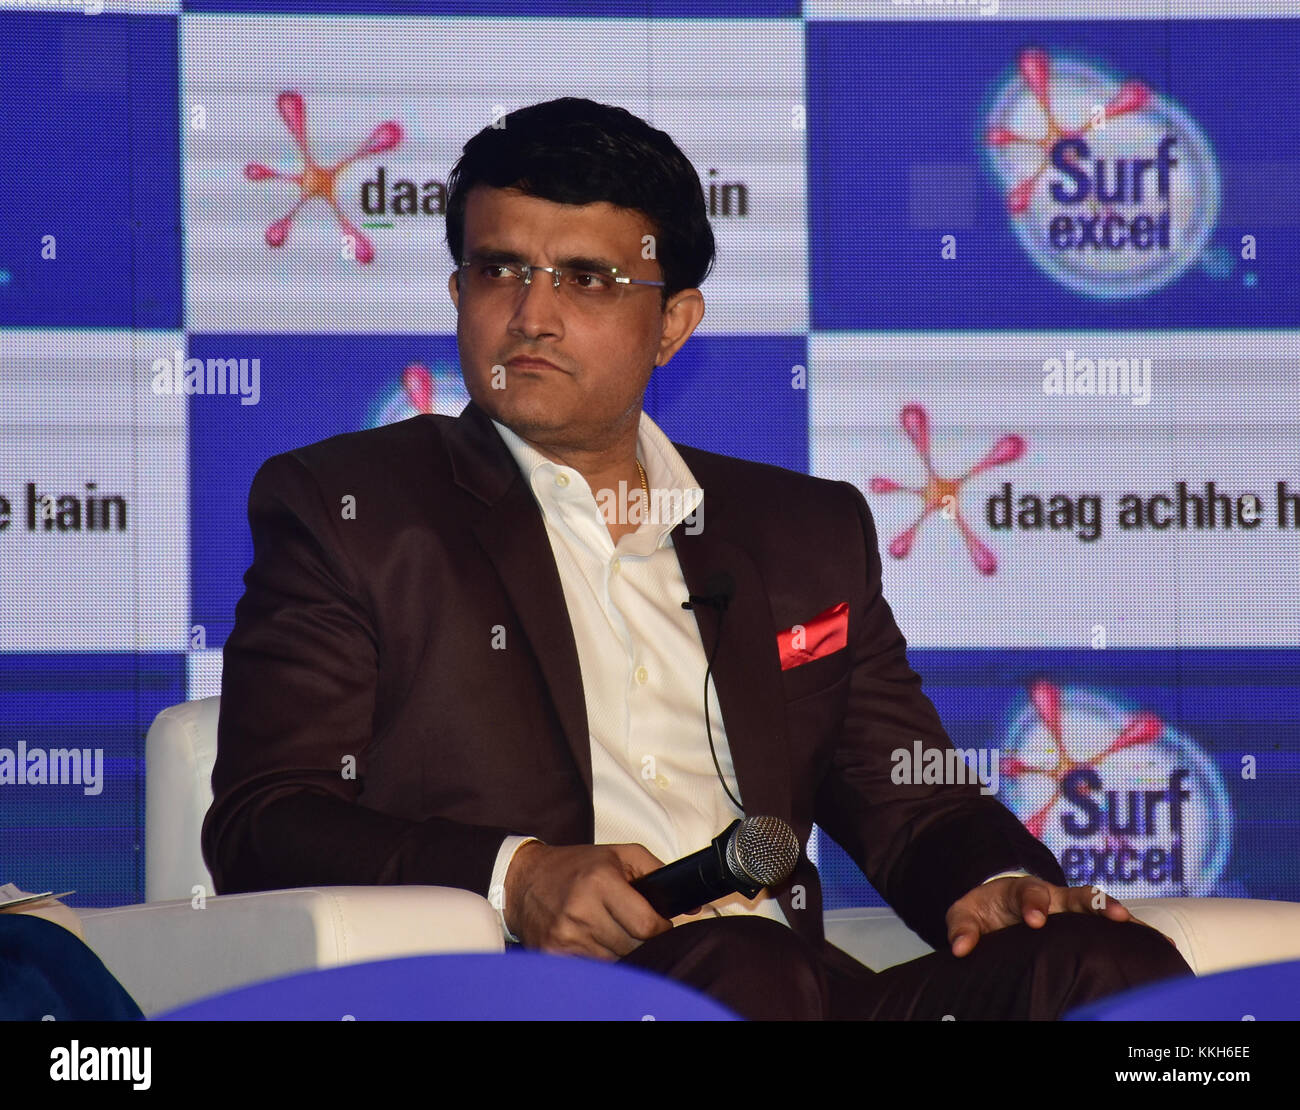 Mumbai, India. 30th Nov, 2017. Sourav Ganguly, former Indian cricketer at the launch of Surf excel's latest campaign #HaarKoHarao in Mumbai at hotel Taj Lands End in Mumbai. Credit: SOPA/ZUMA Wire/Alamy Live News Stock Photo